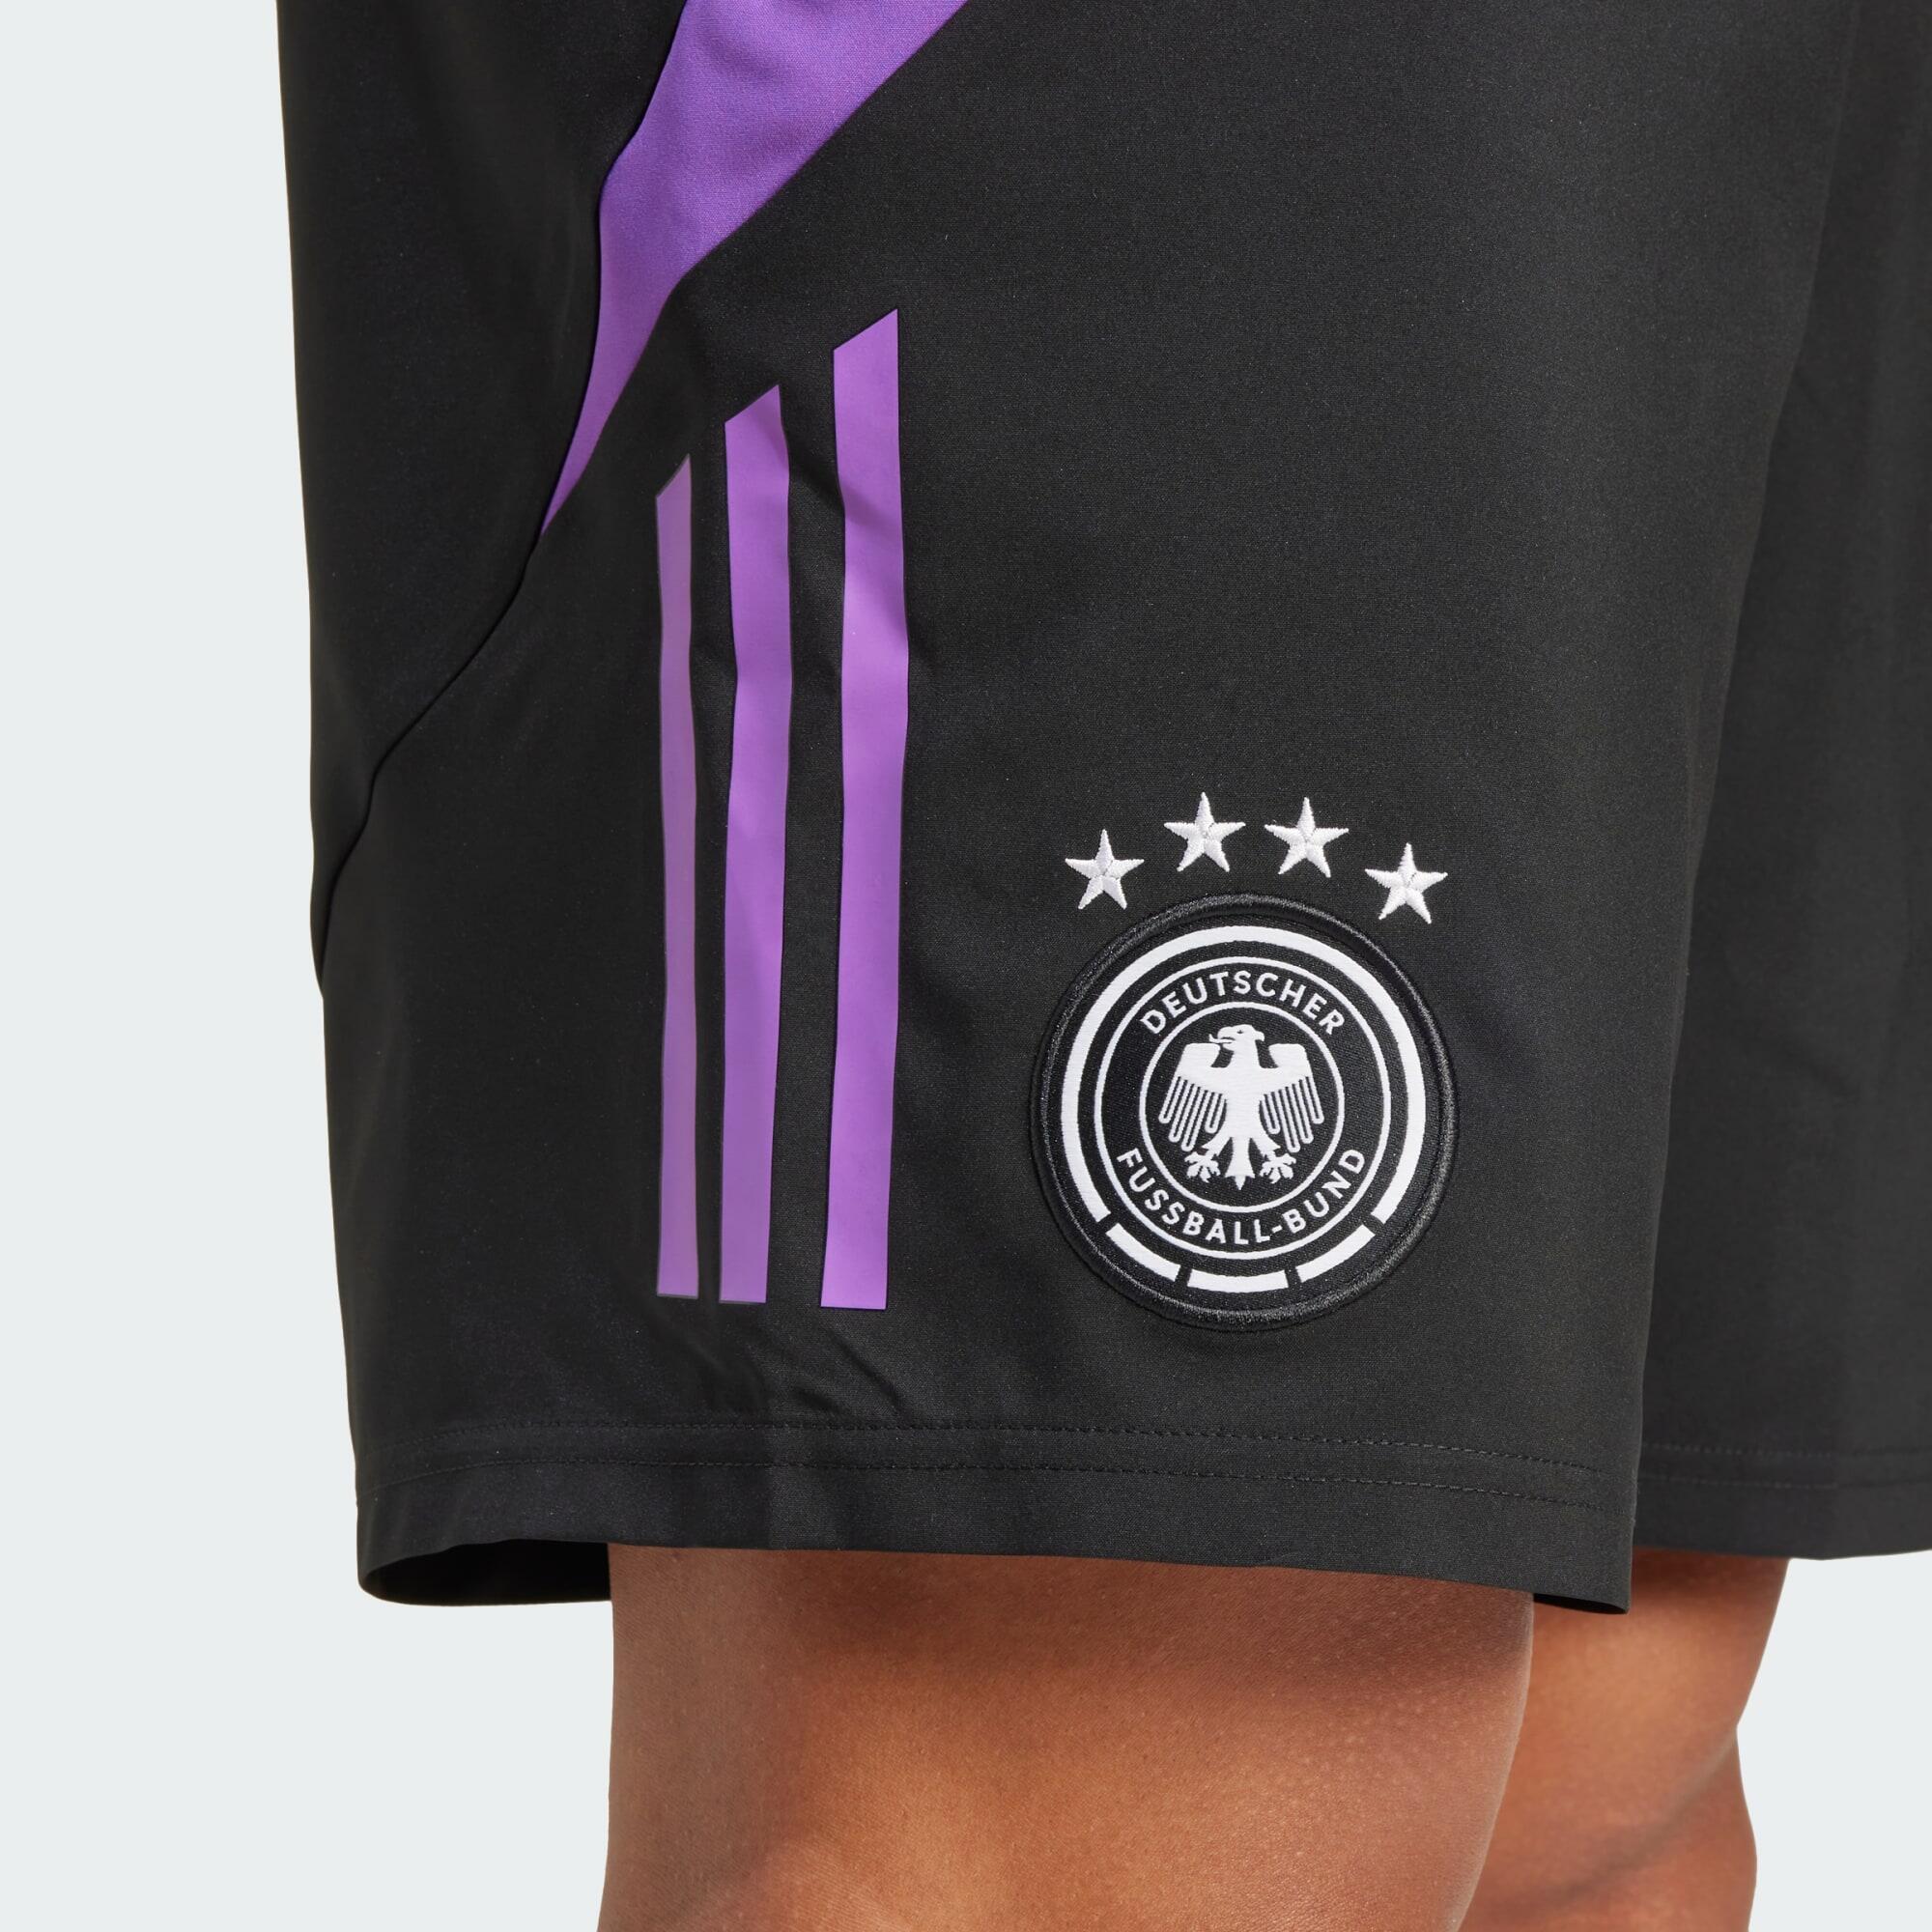 Germany Tiro 24 Competition Downtime Shorts 4/5